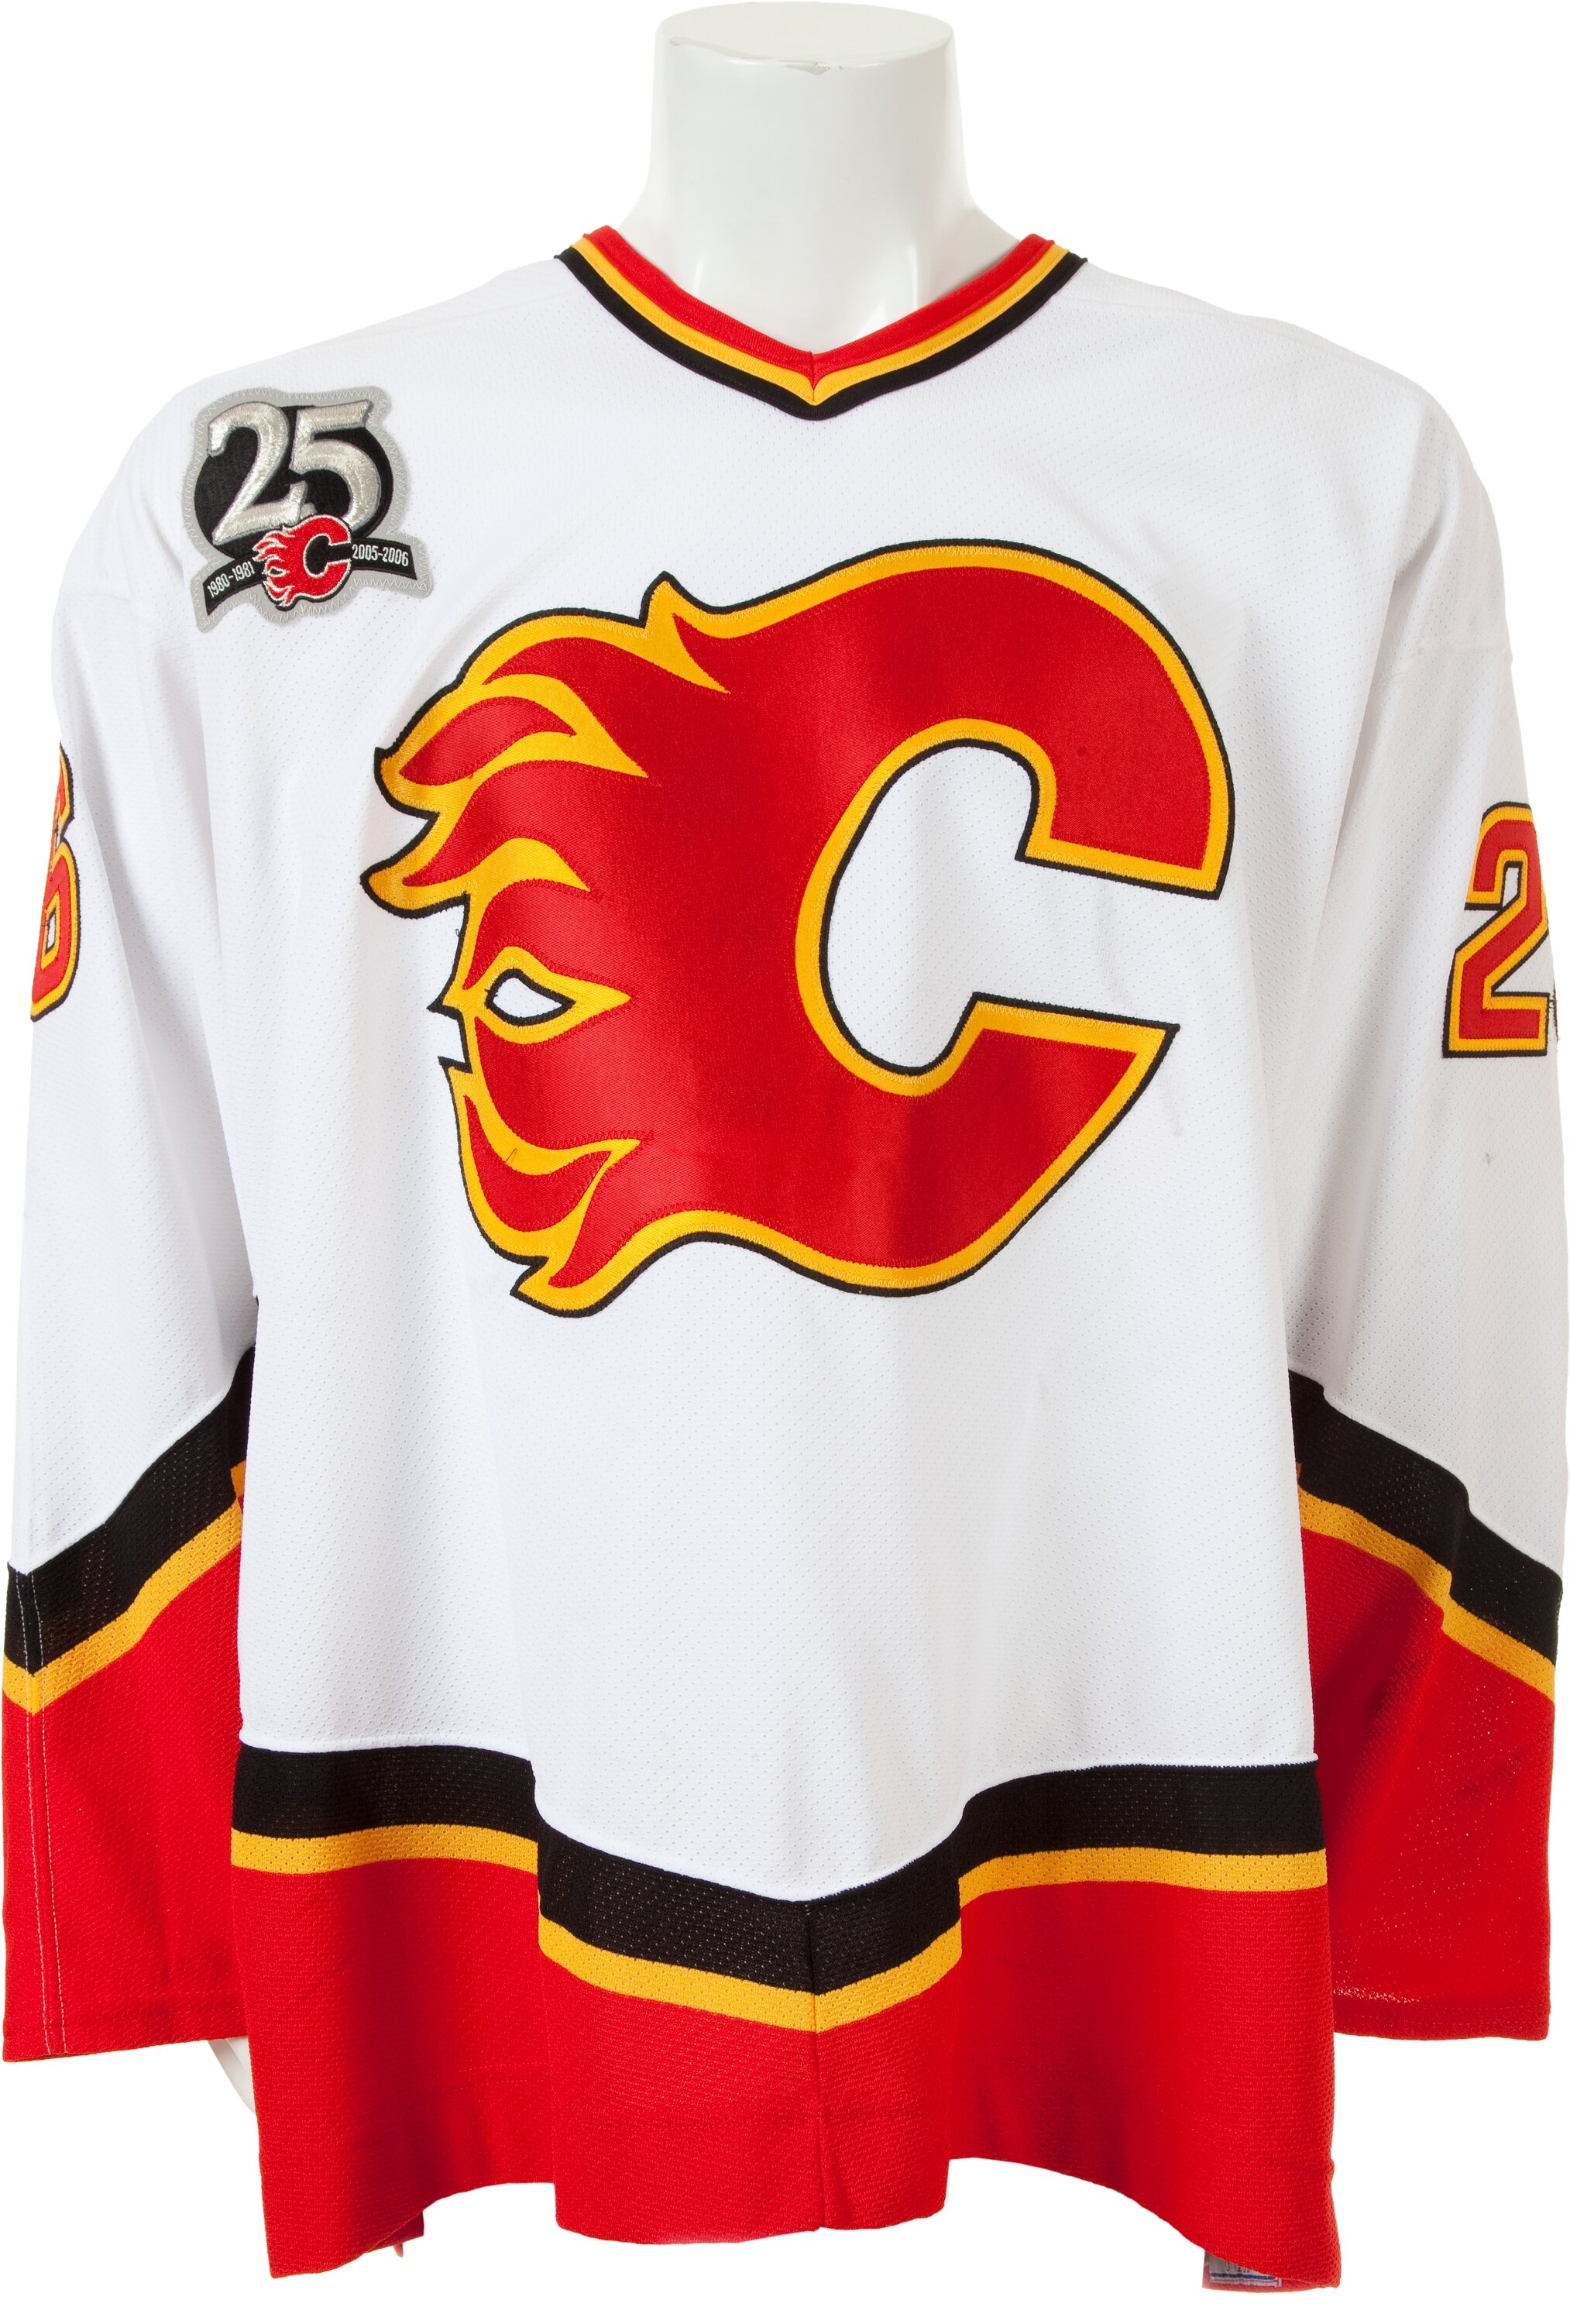 Calgary Flames 25th Anniversary Jersey Patch (2006)